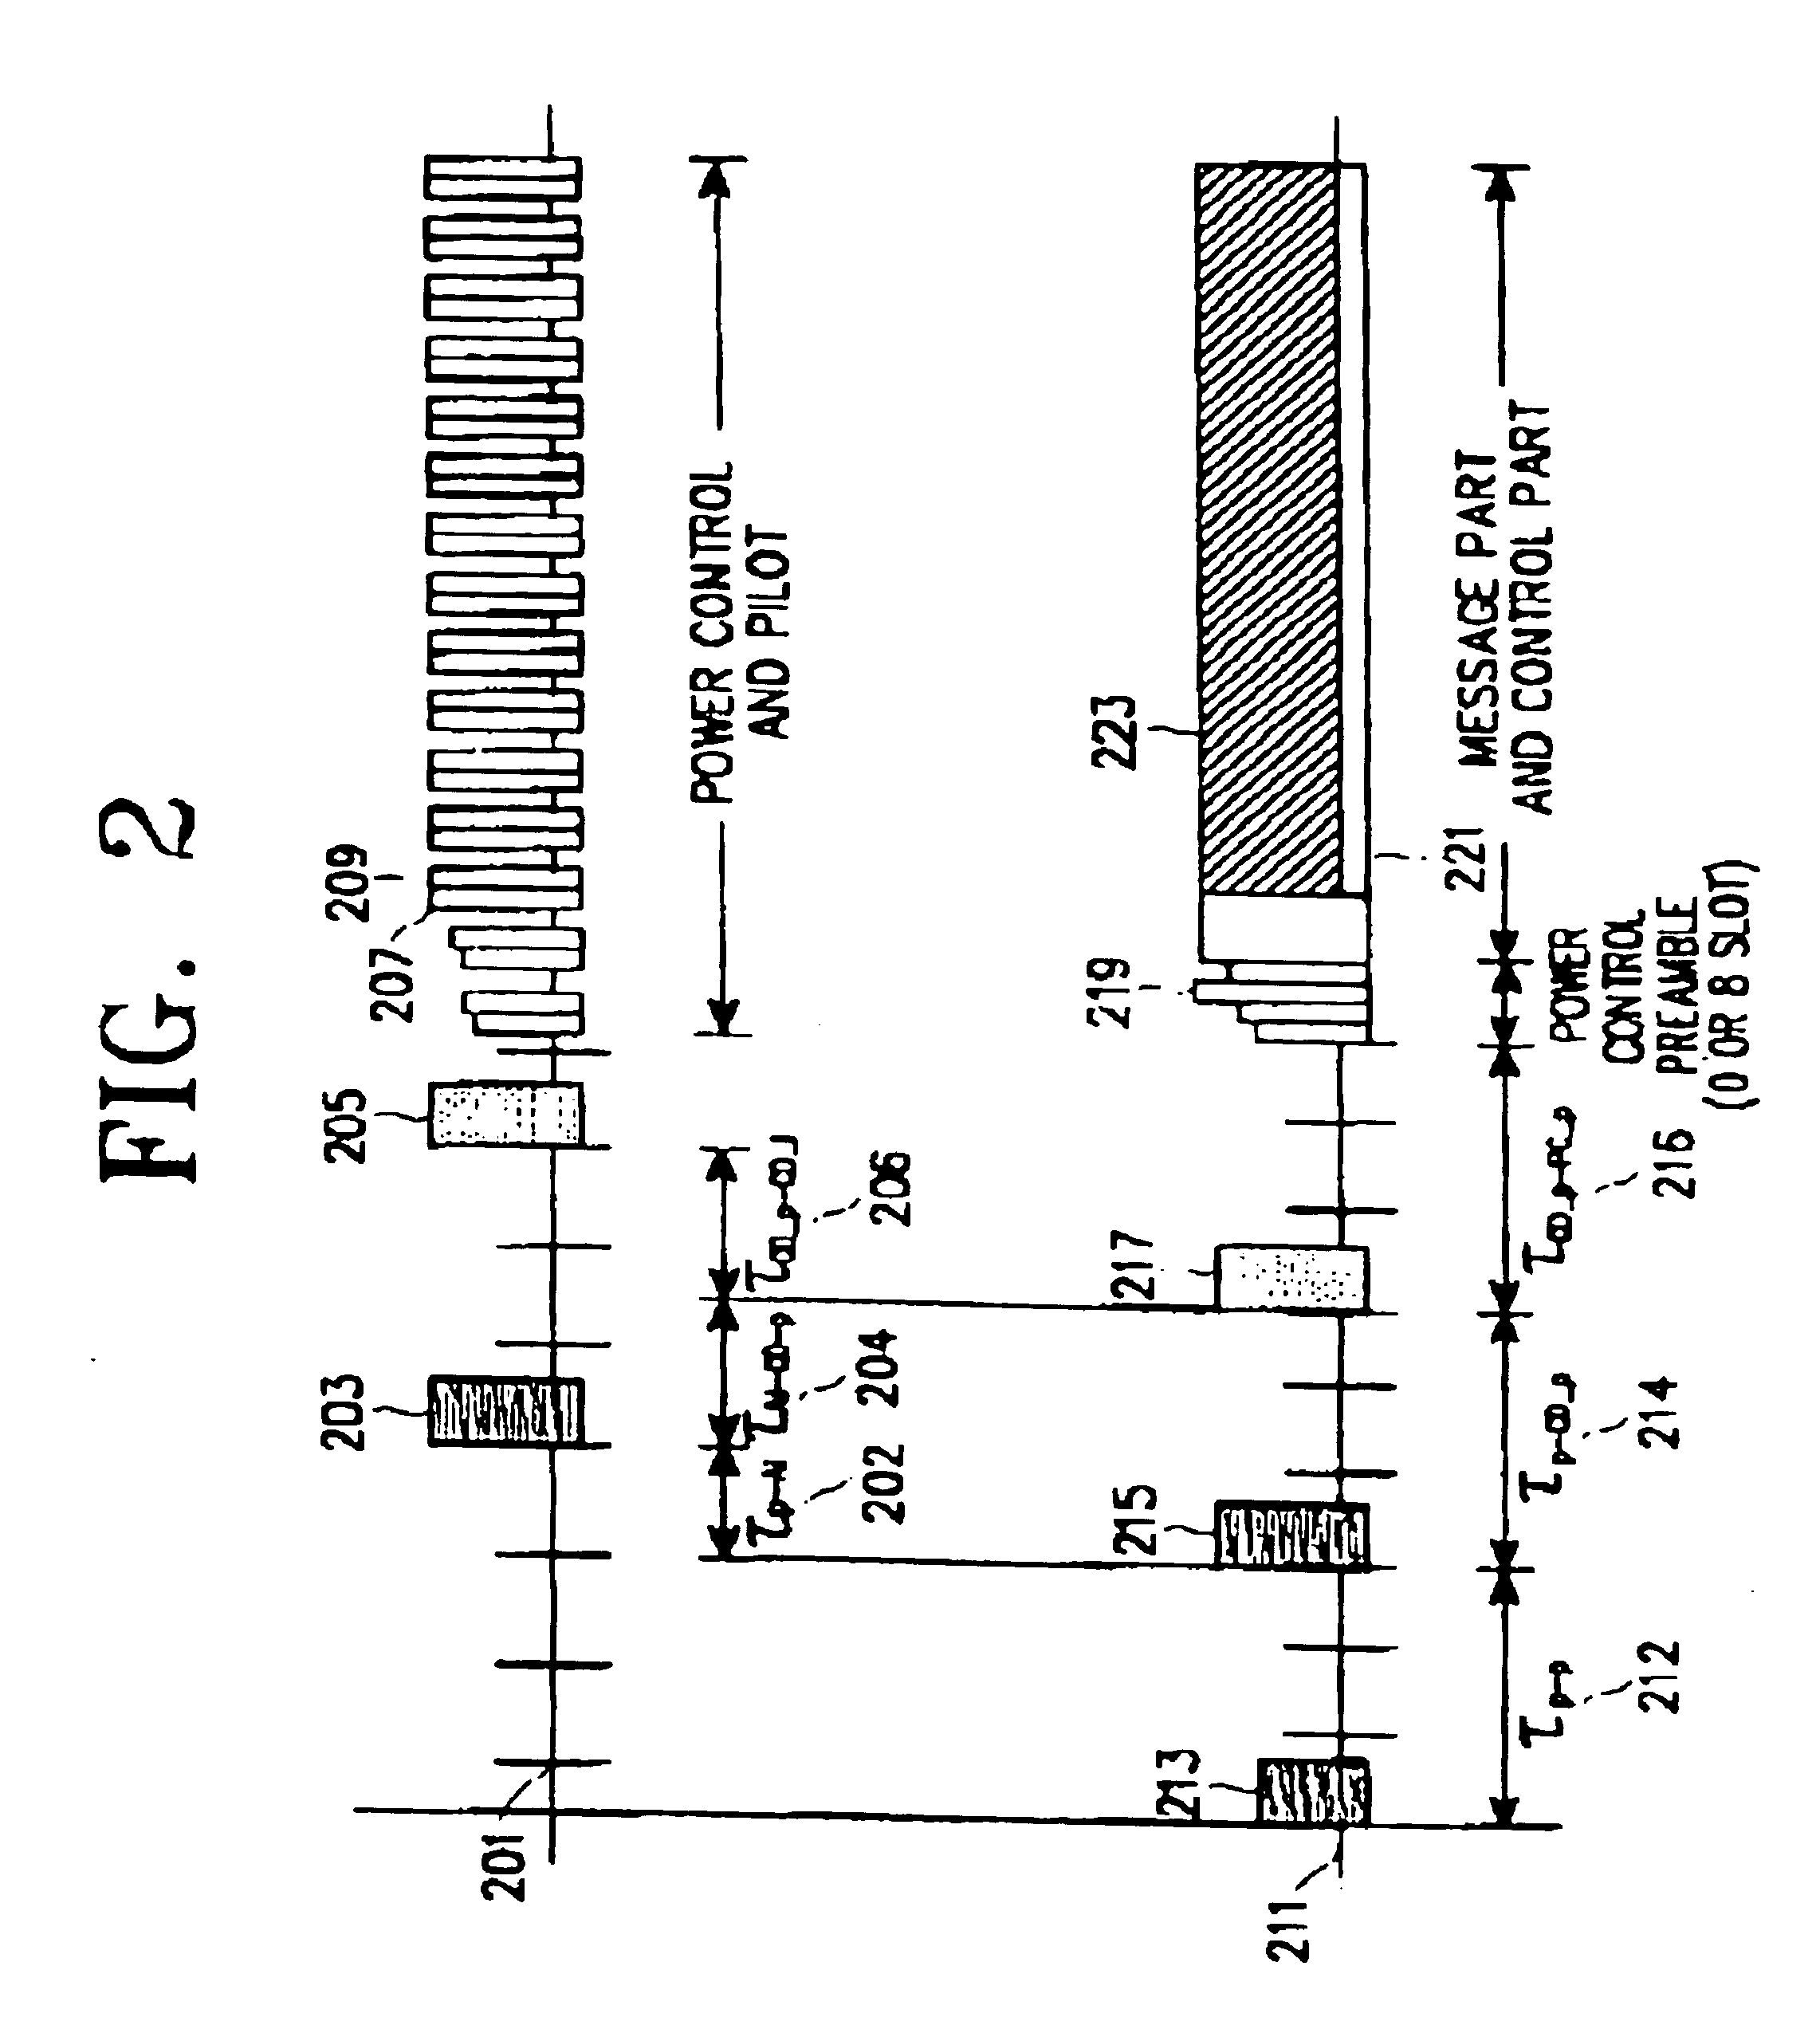 Channel assignment apparatus and method for a common packet channel in a WCDMA mobile communication system